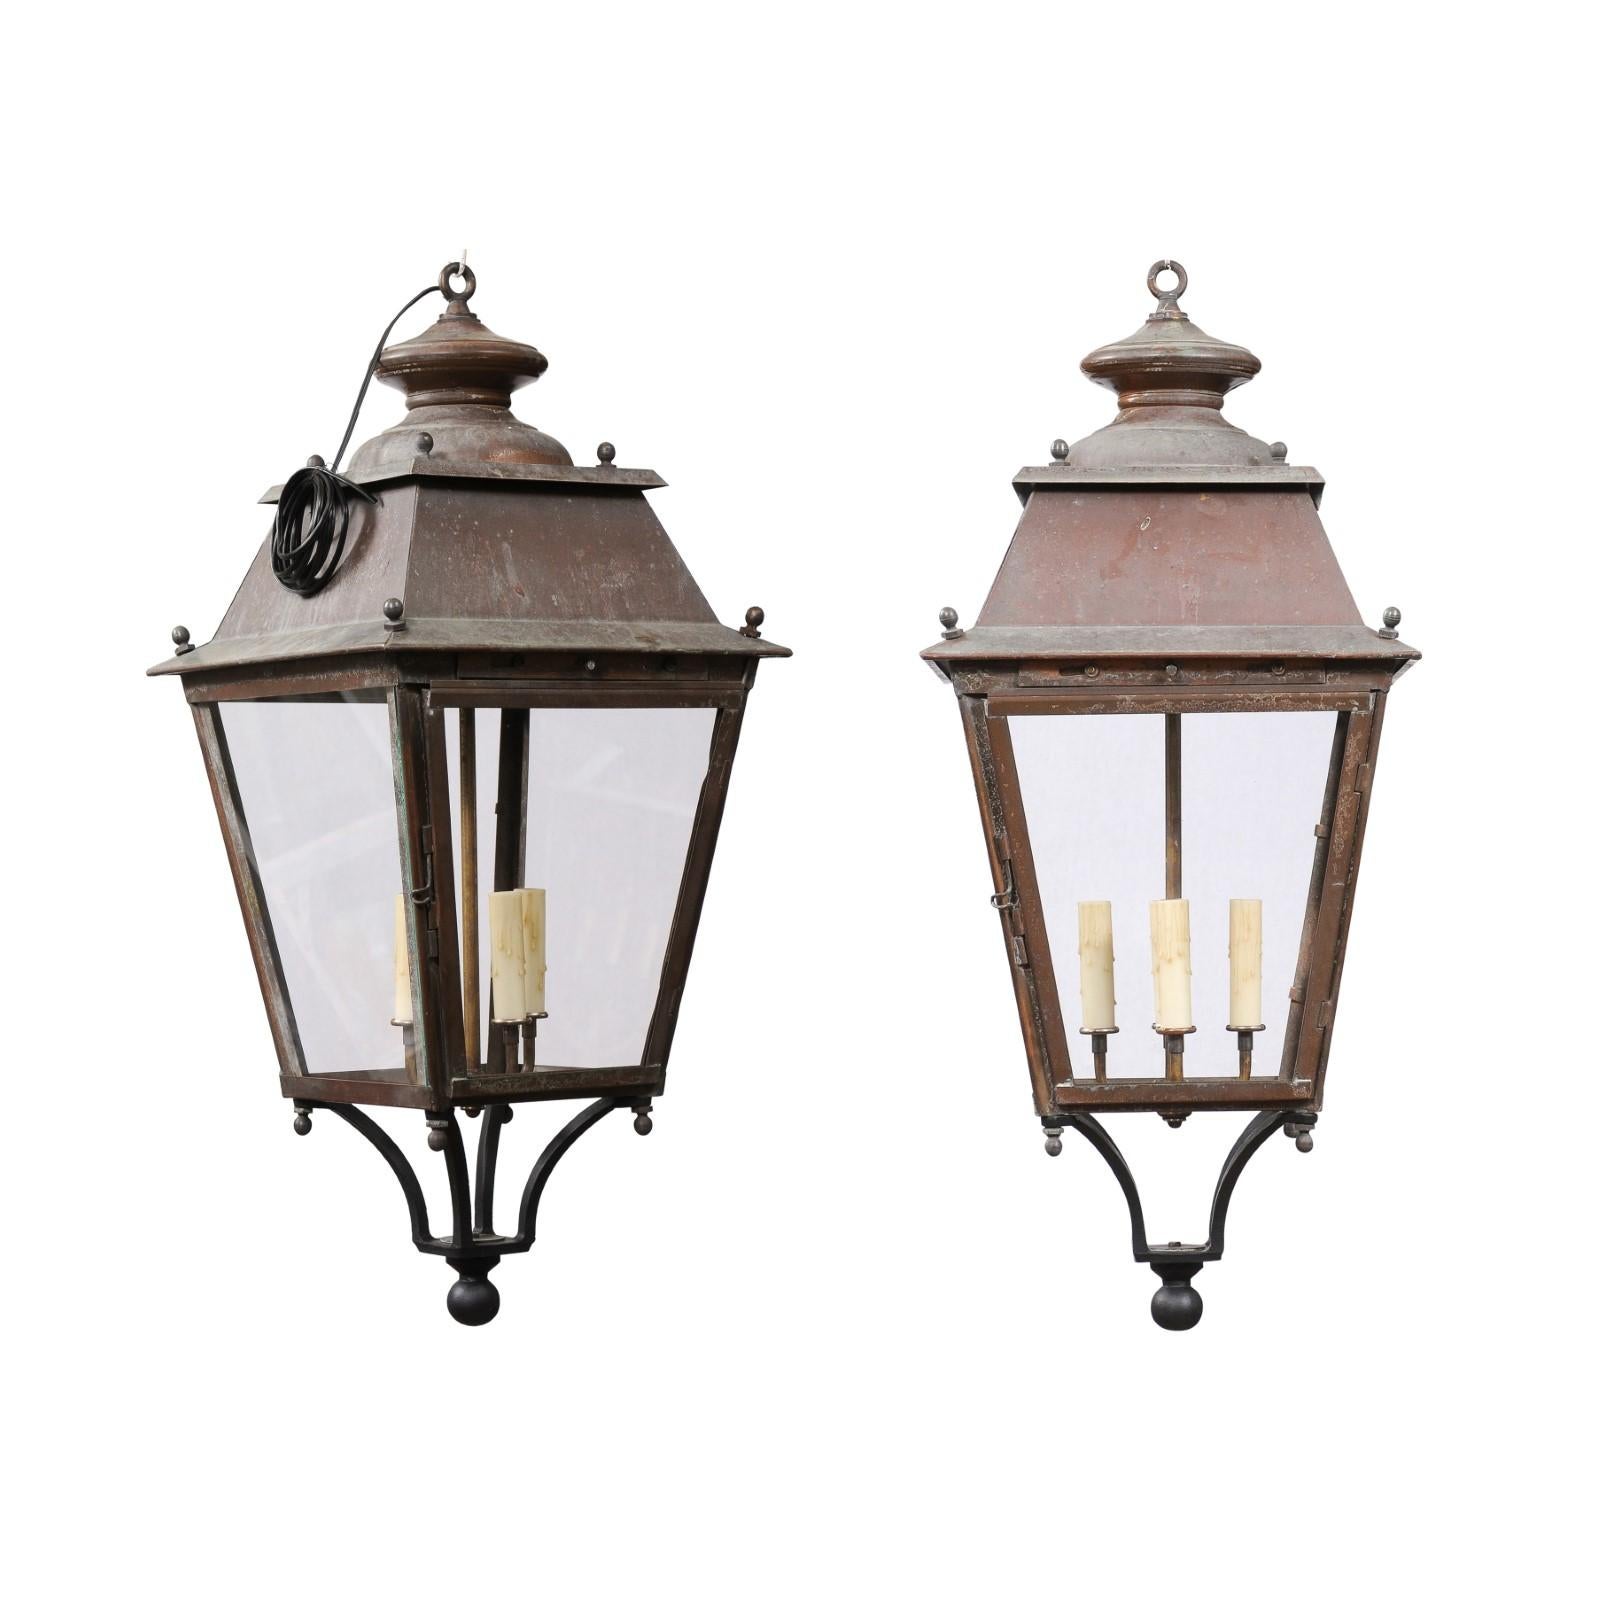 Two French copper lanterns from the 20th century, with four lights, glass panels, petite finial and rustic character. They are priced and sold each. Emanating a timeless rustic charm, these French copper lanterns from the 20th century are a perfect